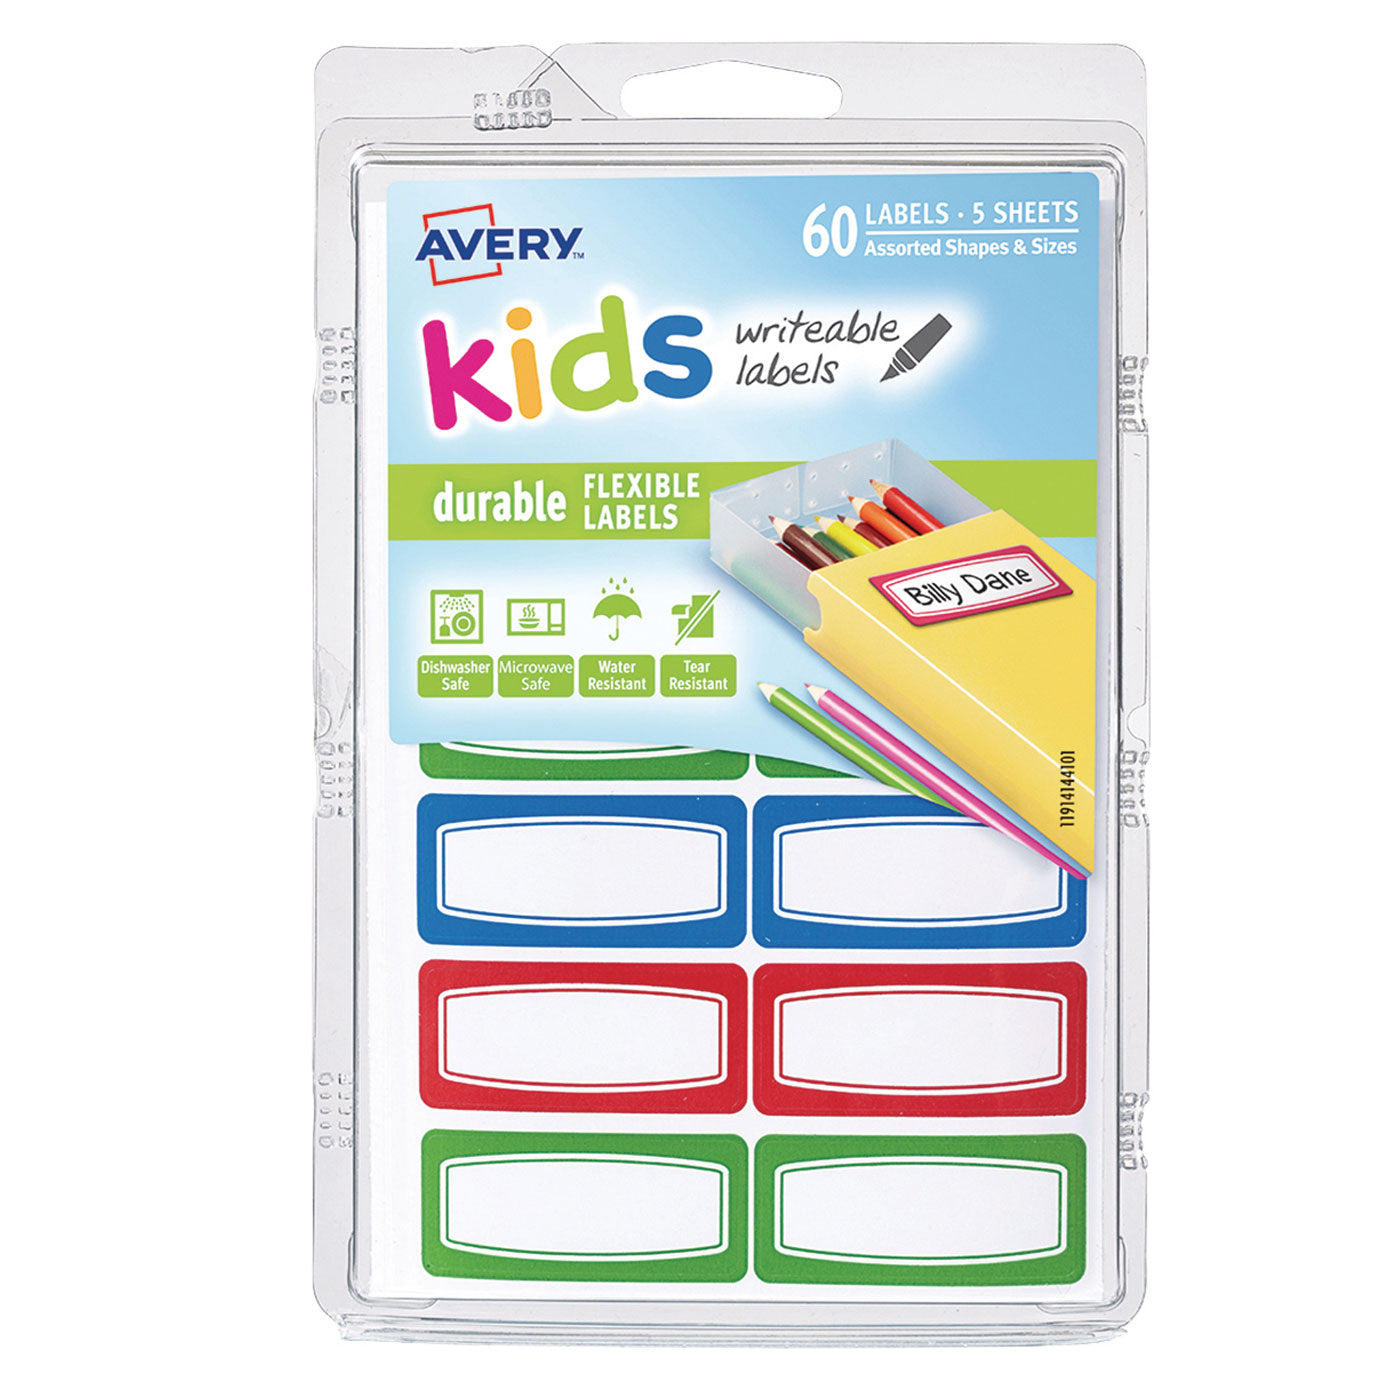 AVERY LABEL KIDS DURABLE GREEN BLUE RED BORDER 44 X 19 MM 60 labels